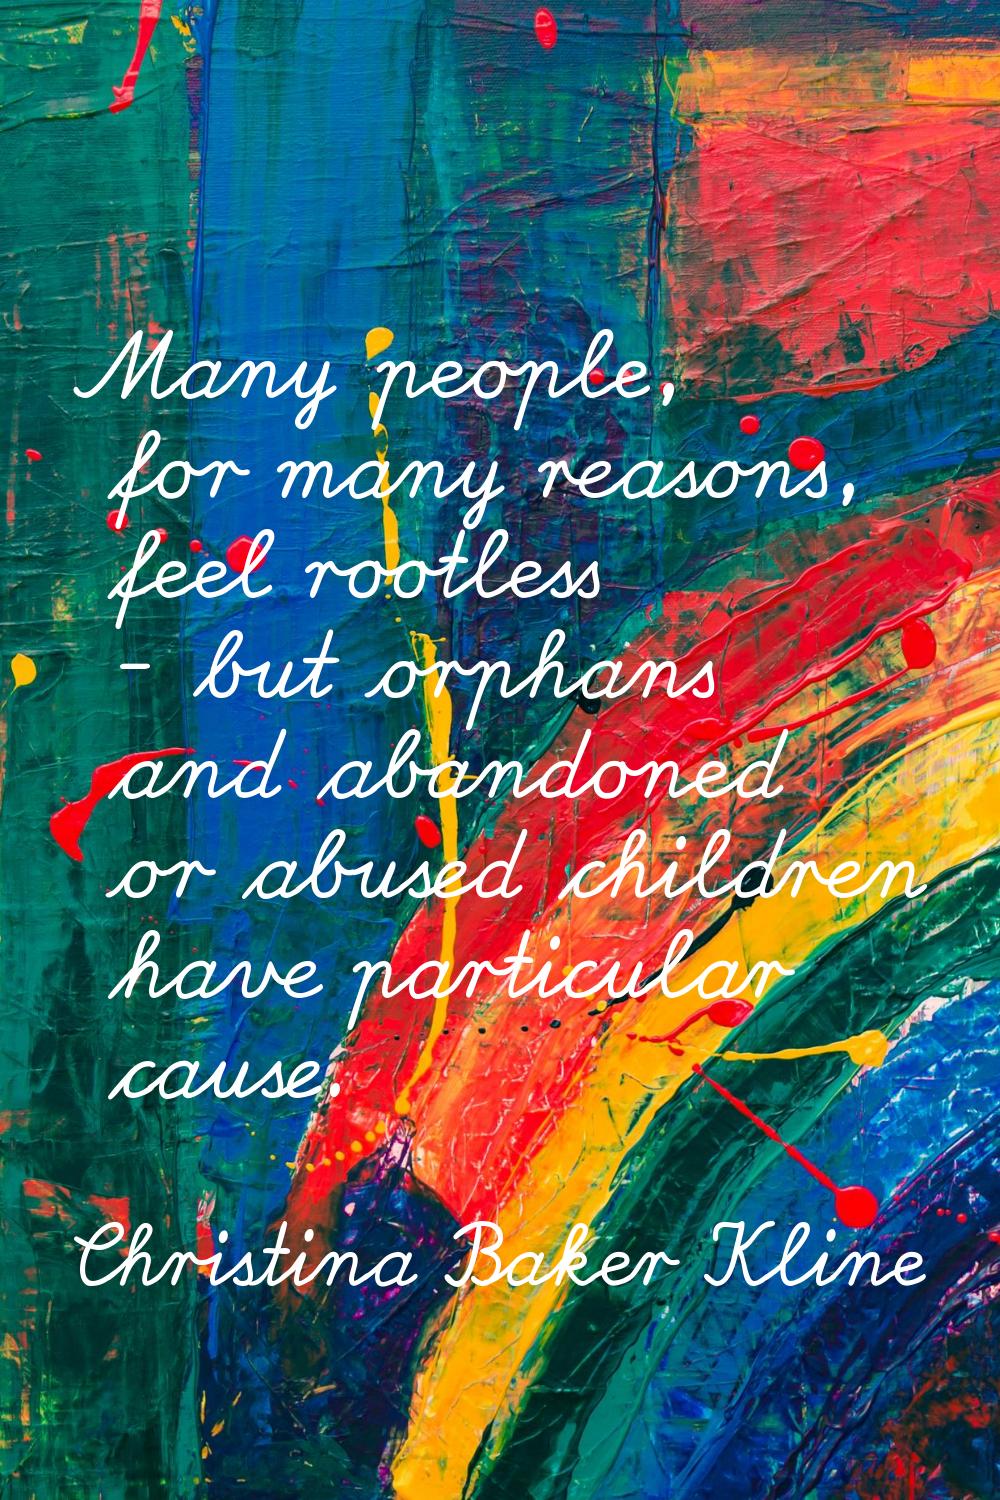 Many people, for many reasons, feel rootless - but orphans and abandoned or abused children have pa